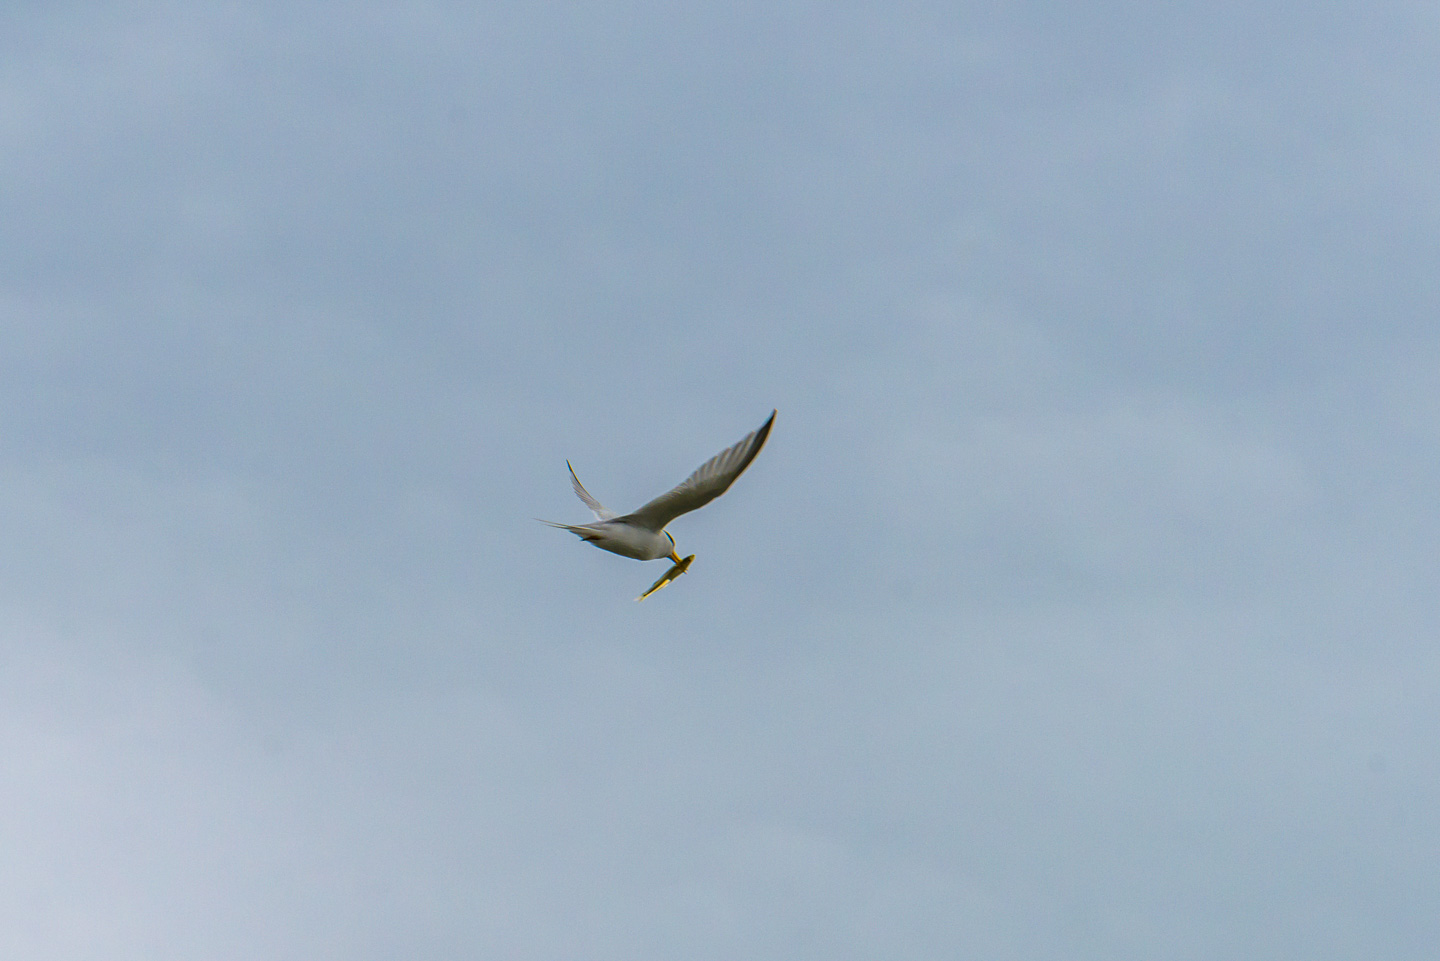 A gull flying with a small fish in its beak